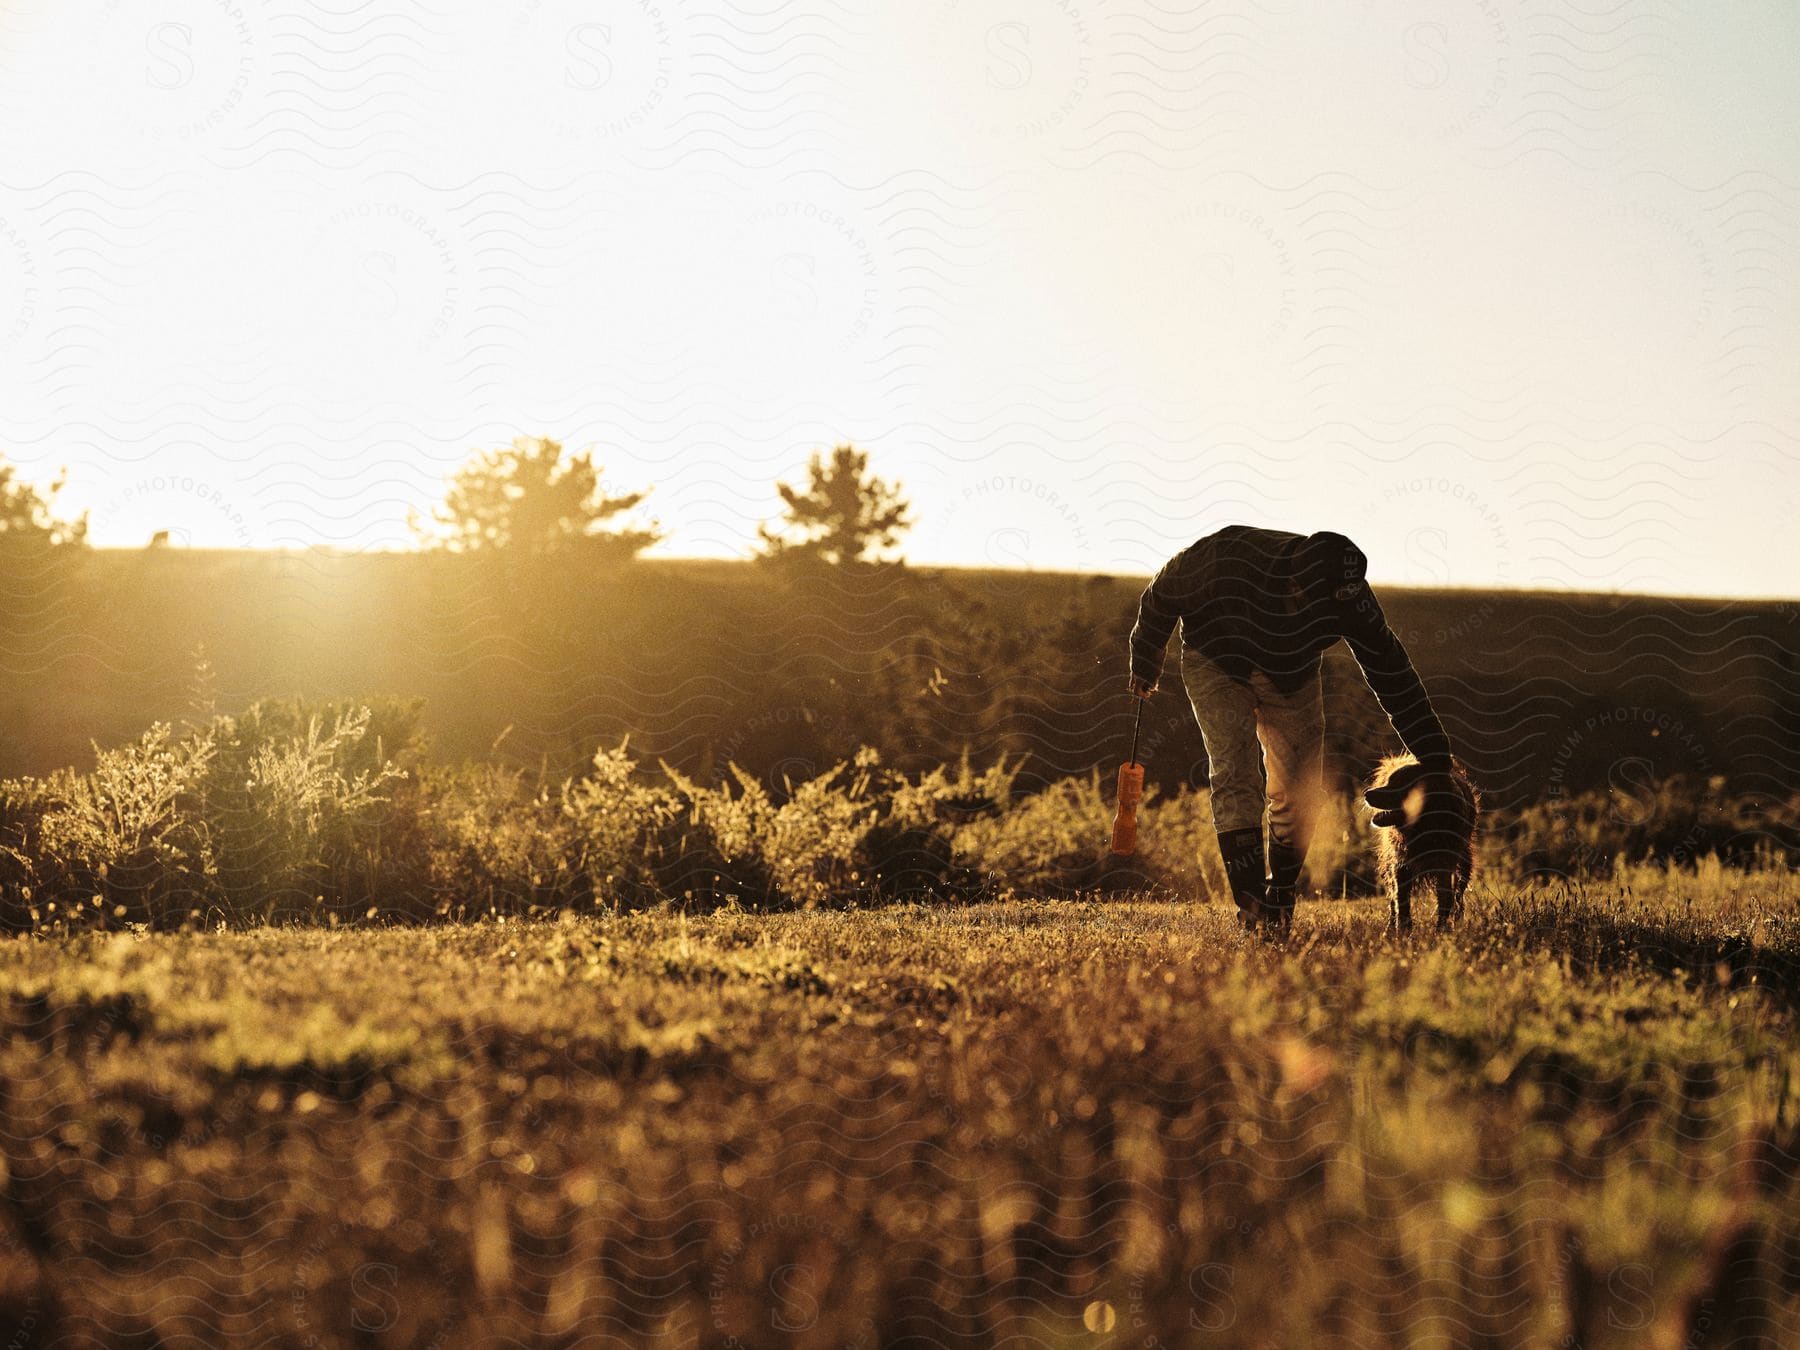 Man bending forward playing with a dog in a field during sunset.